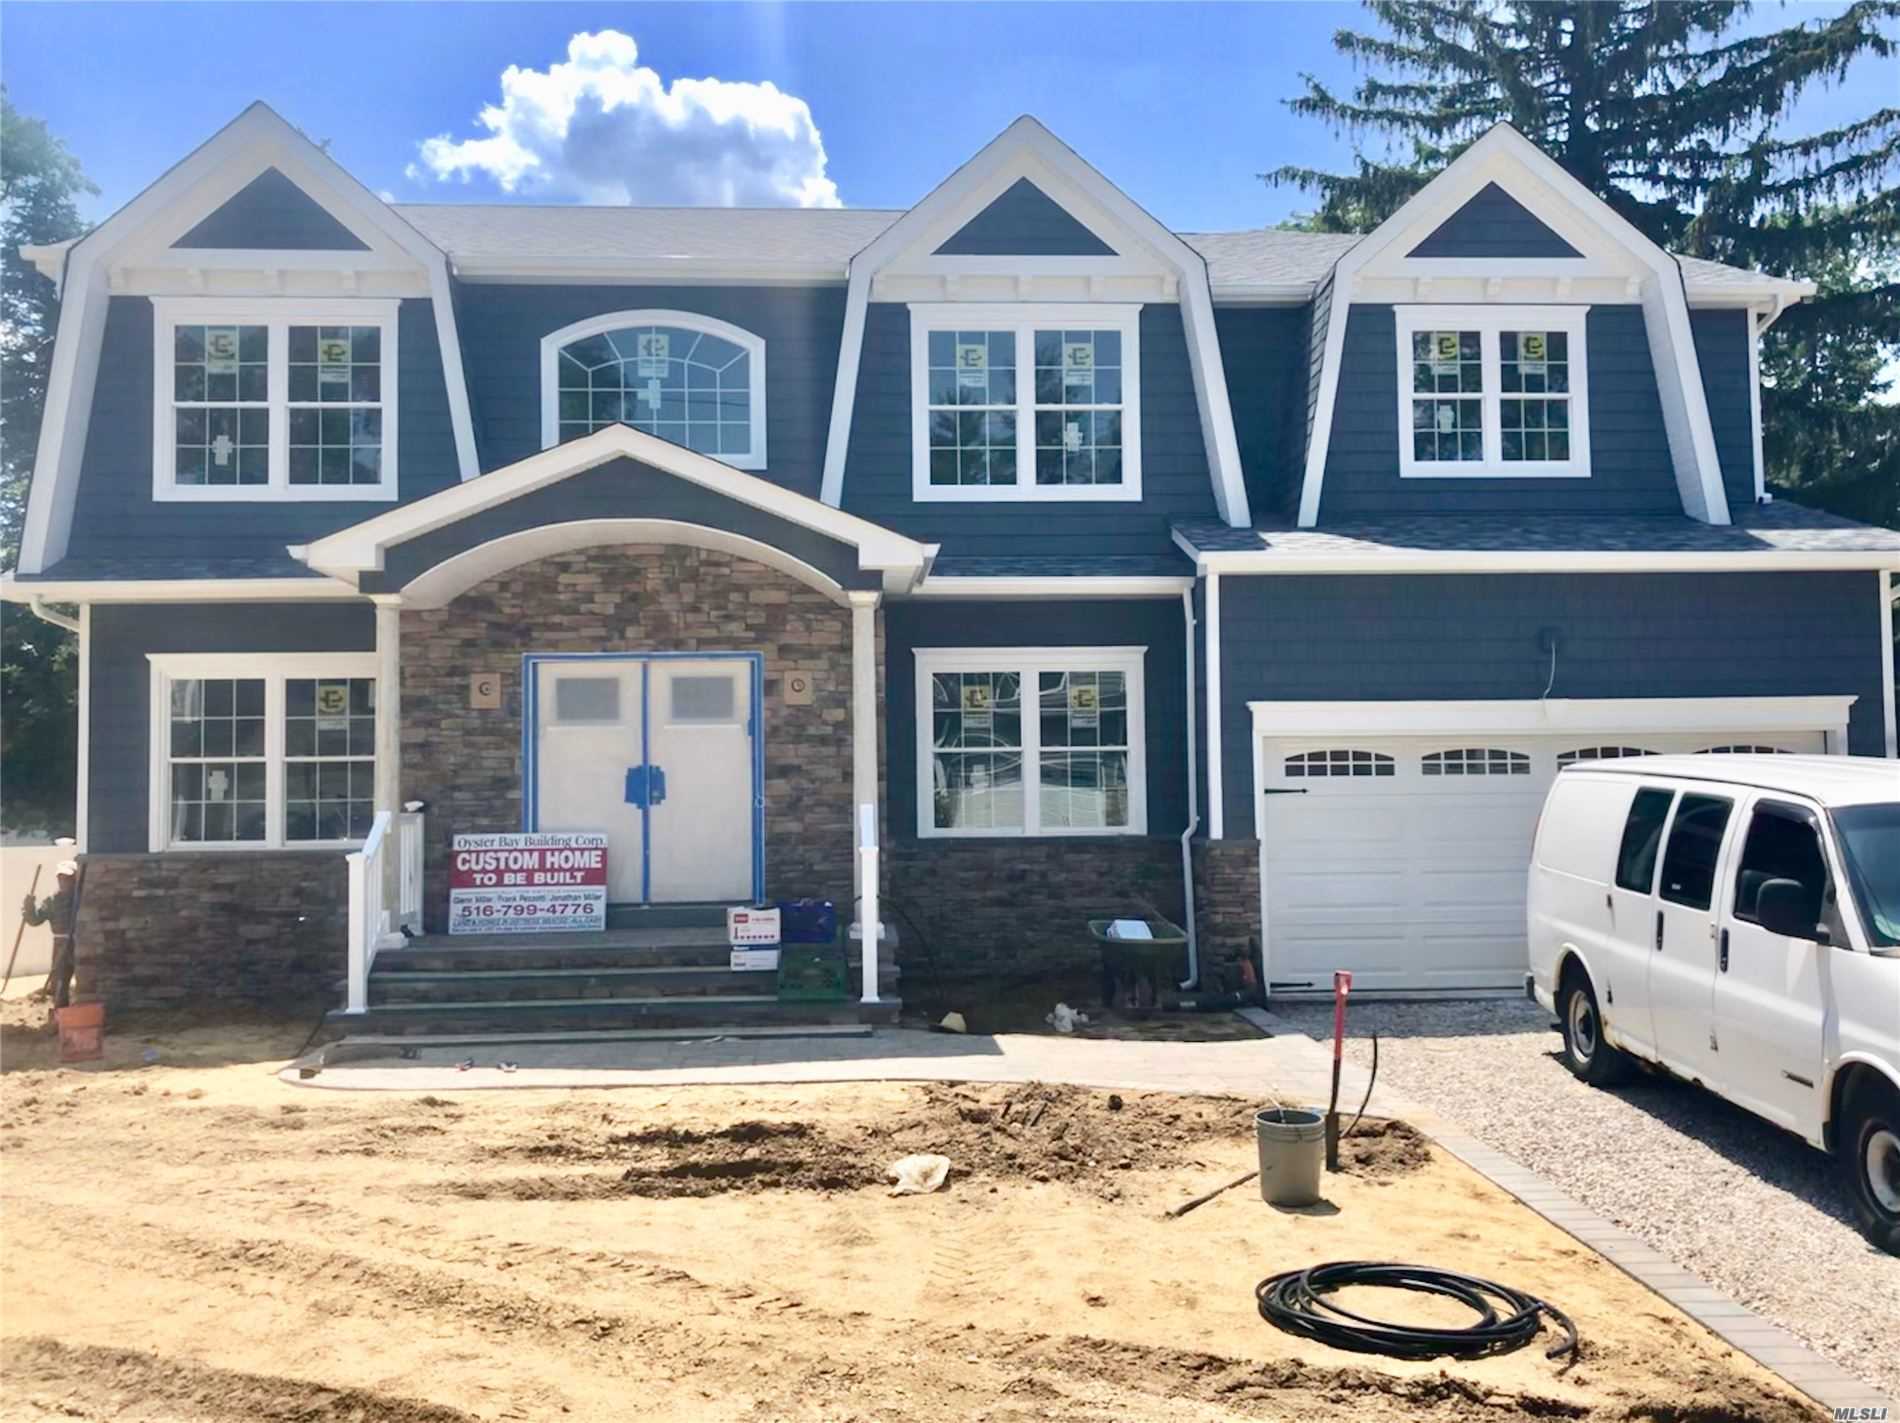 Home is about FINISHED In Heart Of Wantagh Woods (Oct. Completion)! Finished Photos Are Of Same Model Home Built By Same Quality Bldr Of 30+Yrs/400+Homes! Over 3600 SqFt Of Open Flr Plan Designed To PERFECTION & Built w/ Utmost QUALITY of Craftsmanship. CUSTOM Baths & Eat-In-Kit W/Top-Of-Line Appls, Walk-In Pantry, Pella Wdws, IMMACULATE Trim-Work Decorating Every SqFt, 1st Flr Jr Suite Or Office w/Private F-Bath, Add&rsquo;l H-Bath/Powder Rm On 1st Flr, Mstr Ste w/Giant W-I-C & Fbath+Jcuz, &MchMore!